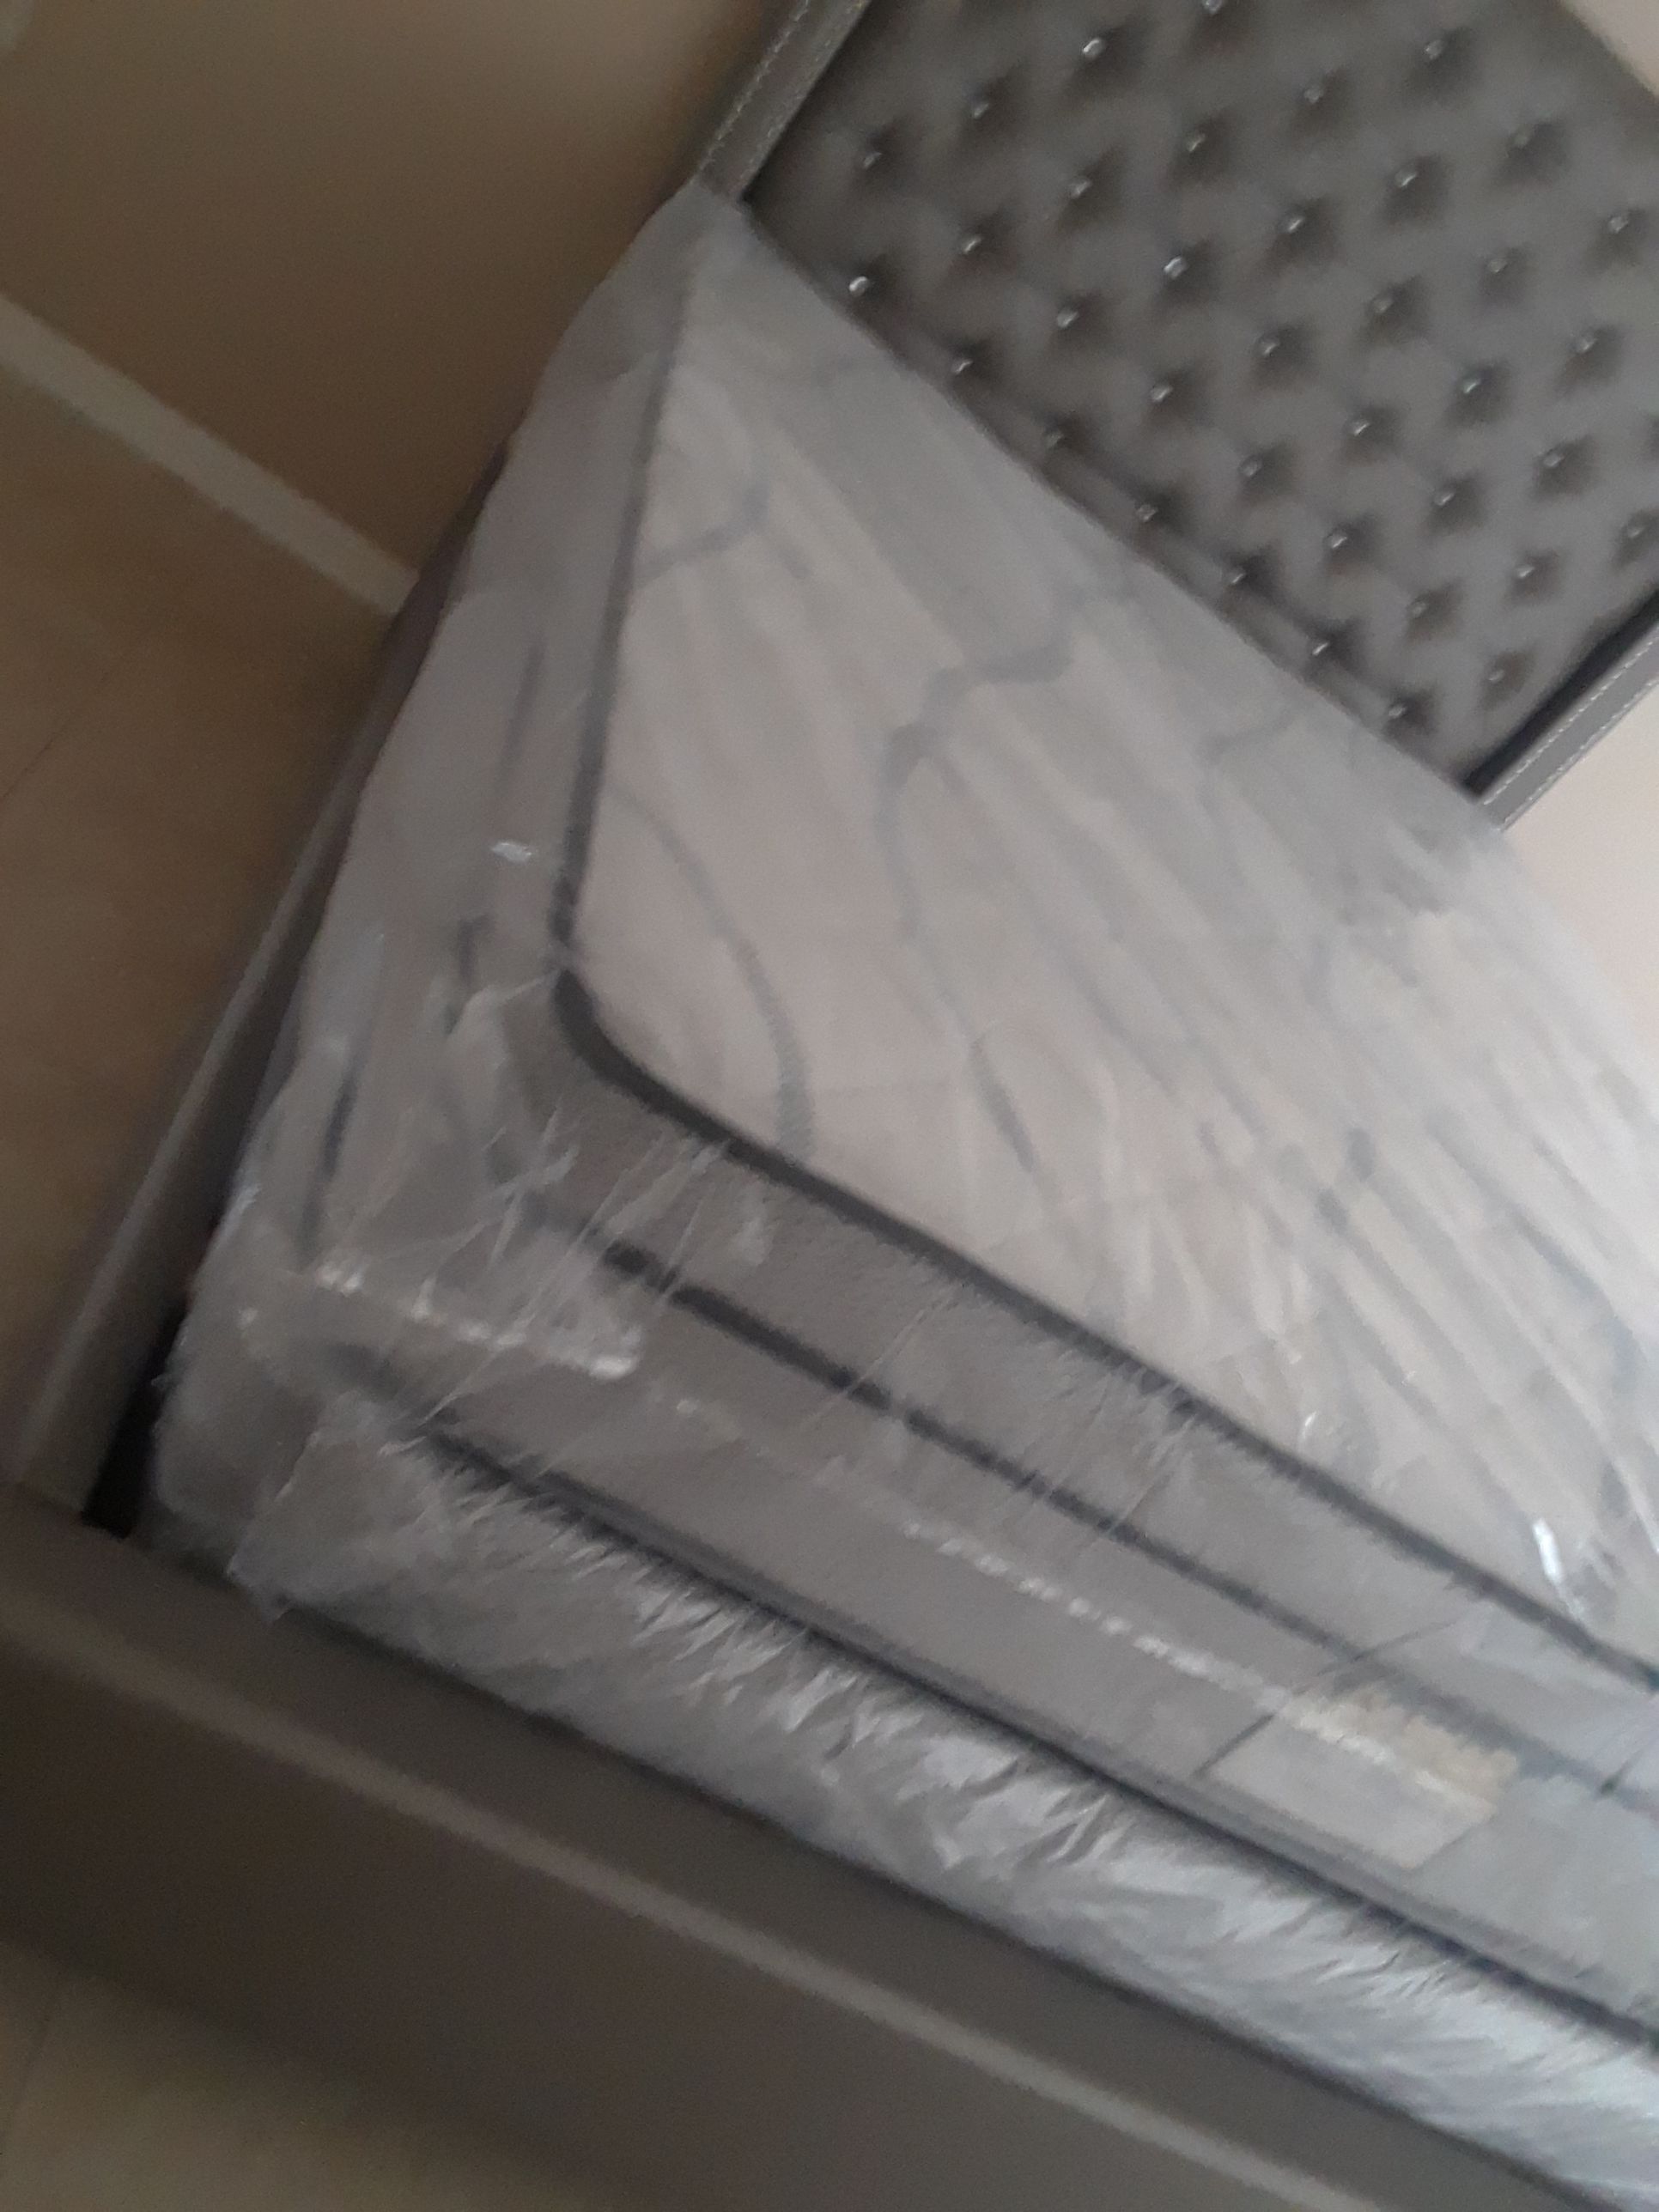 Pillow top queen size mattress sets 269.99 free delivery (Mattress and box spring only )